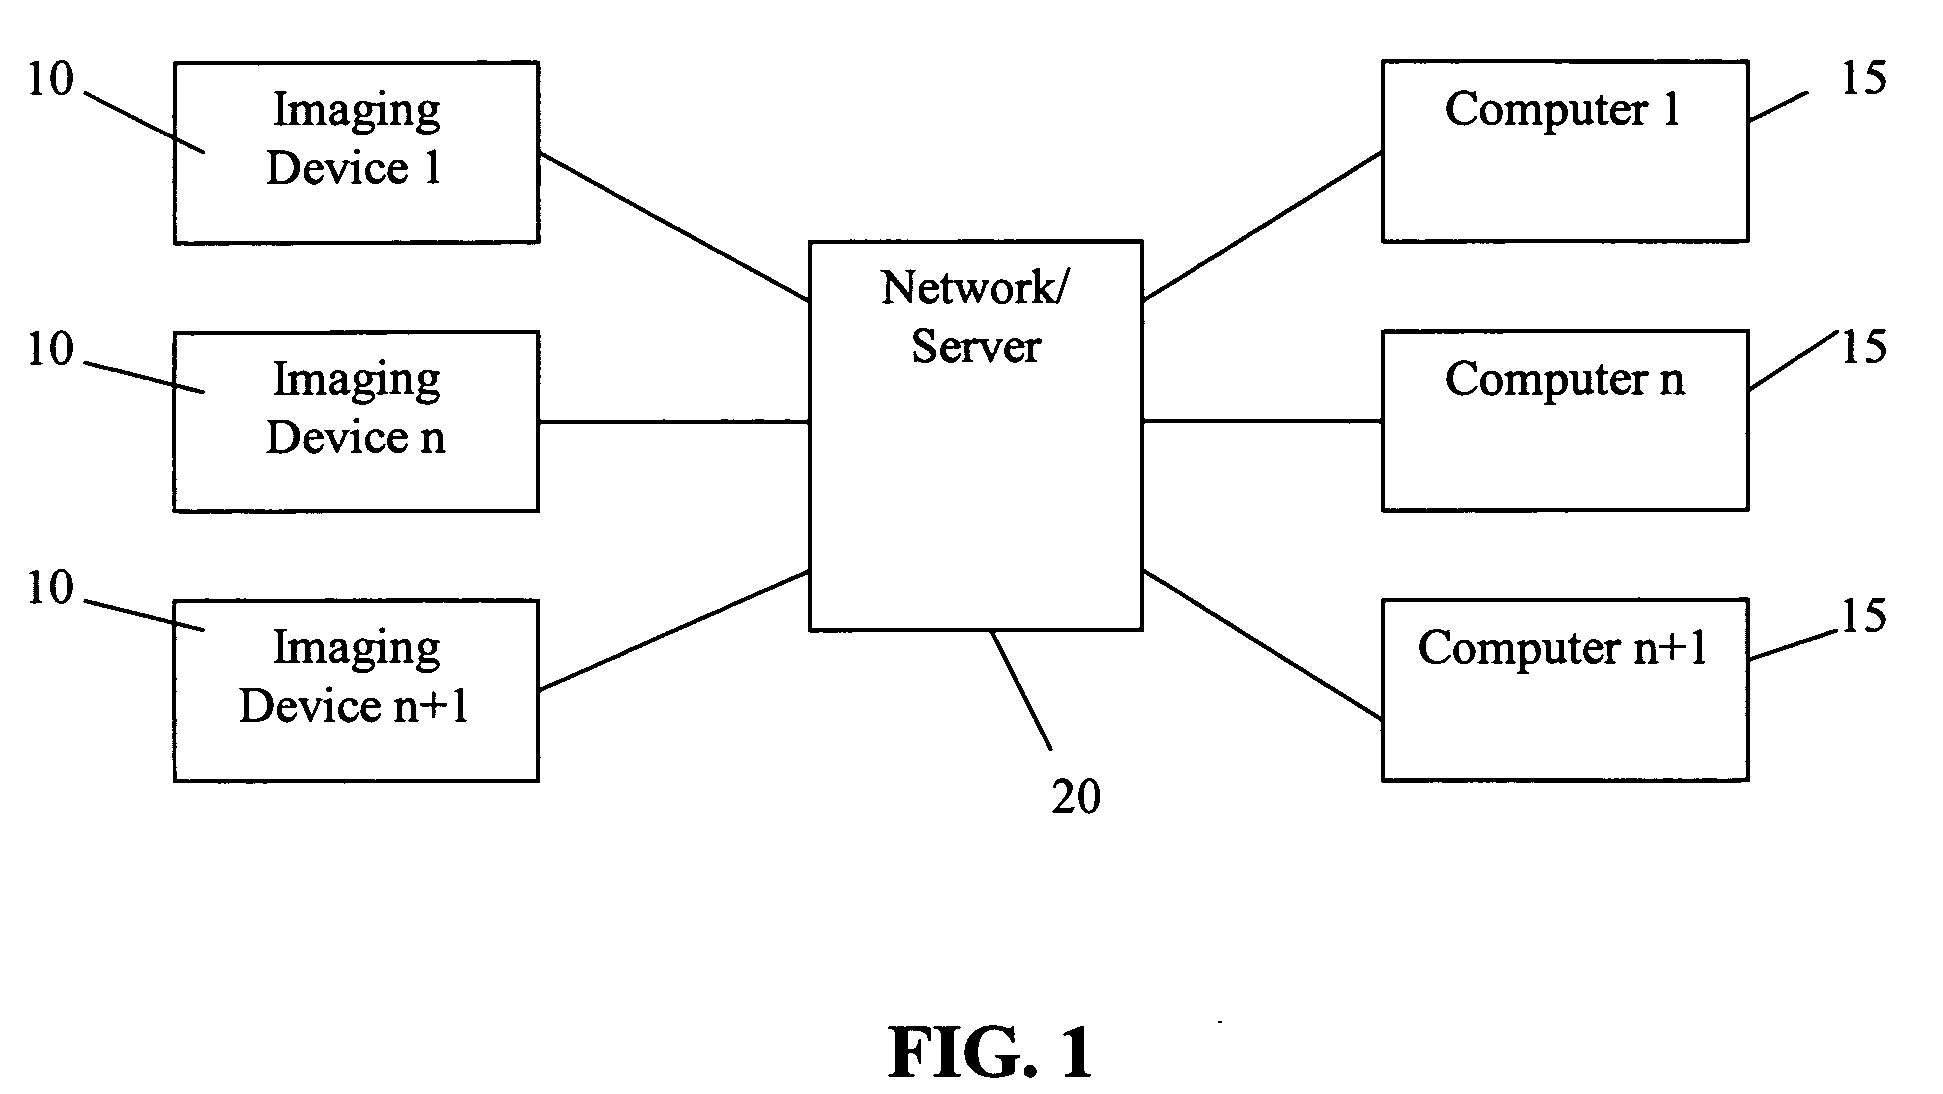 Apparatus and method regarding dynamic icons on a graphical user interface